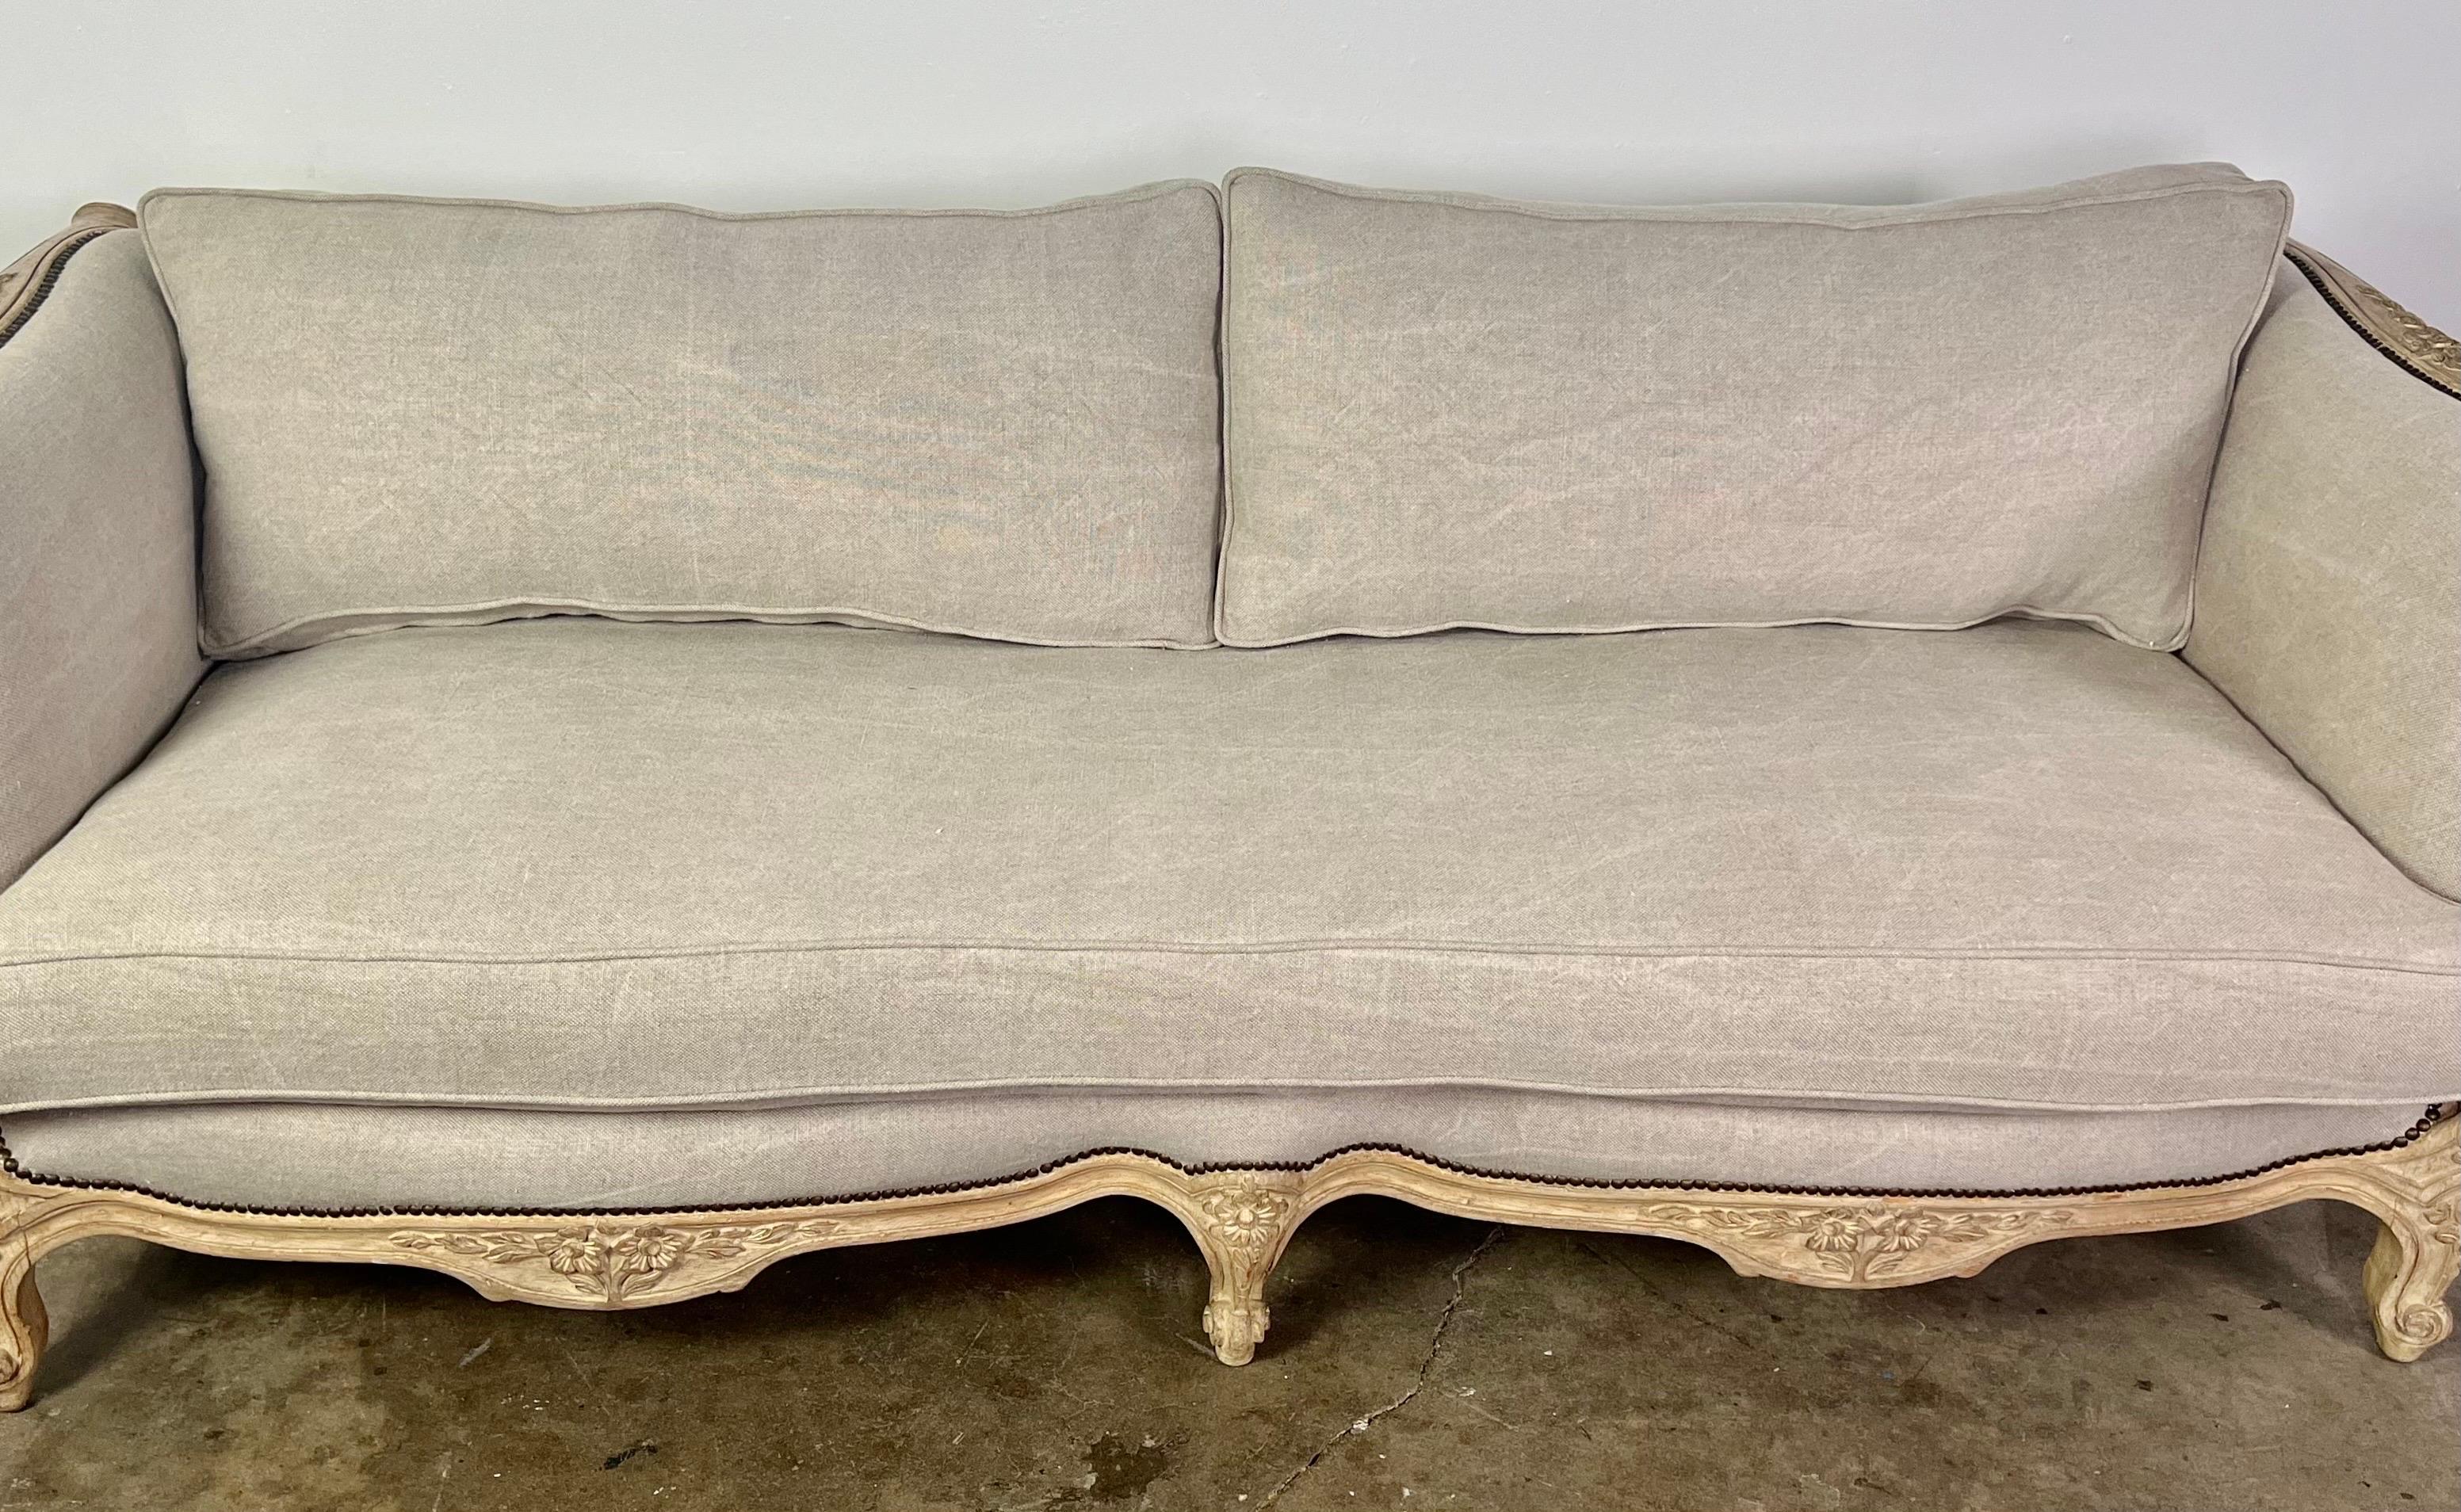 1930s French carved Louis XV style carved sofa upholstered in Belgium linen. There is a loose dacron filled seat cushion and two soft decron back cushions.